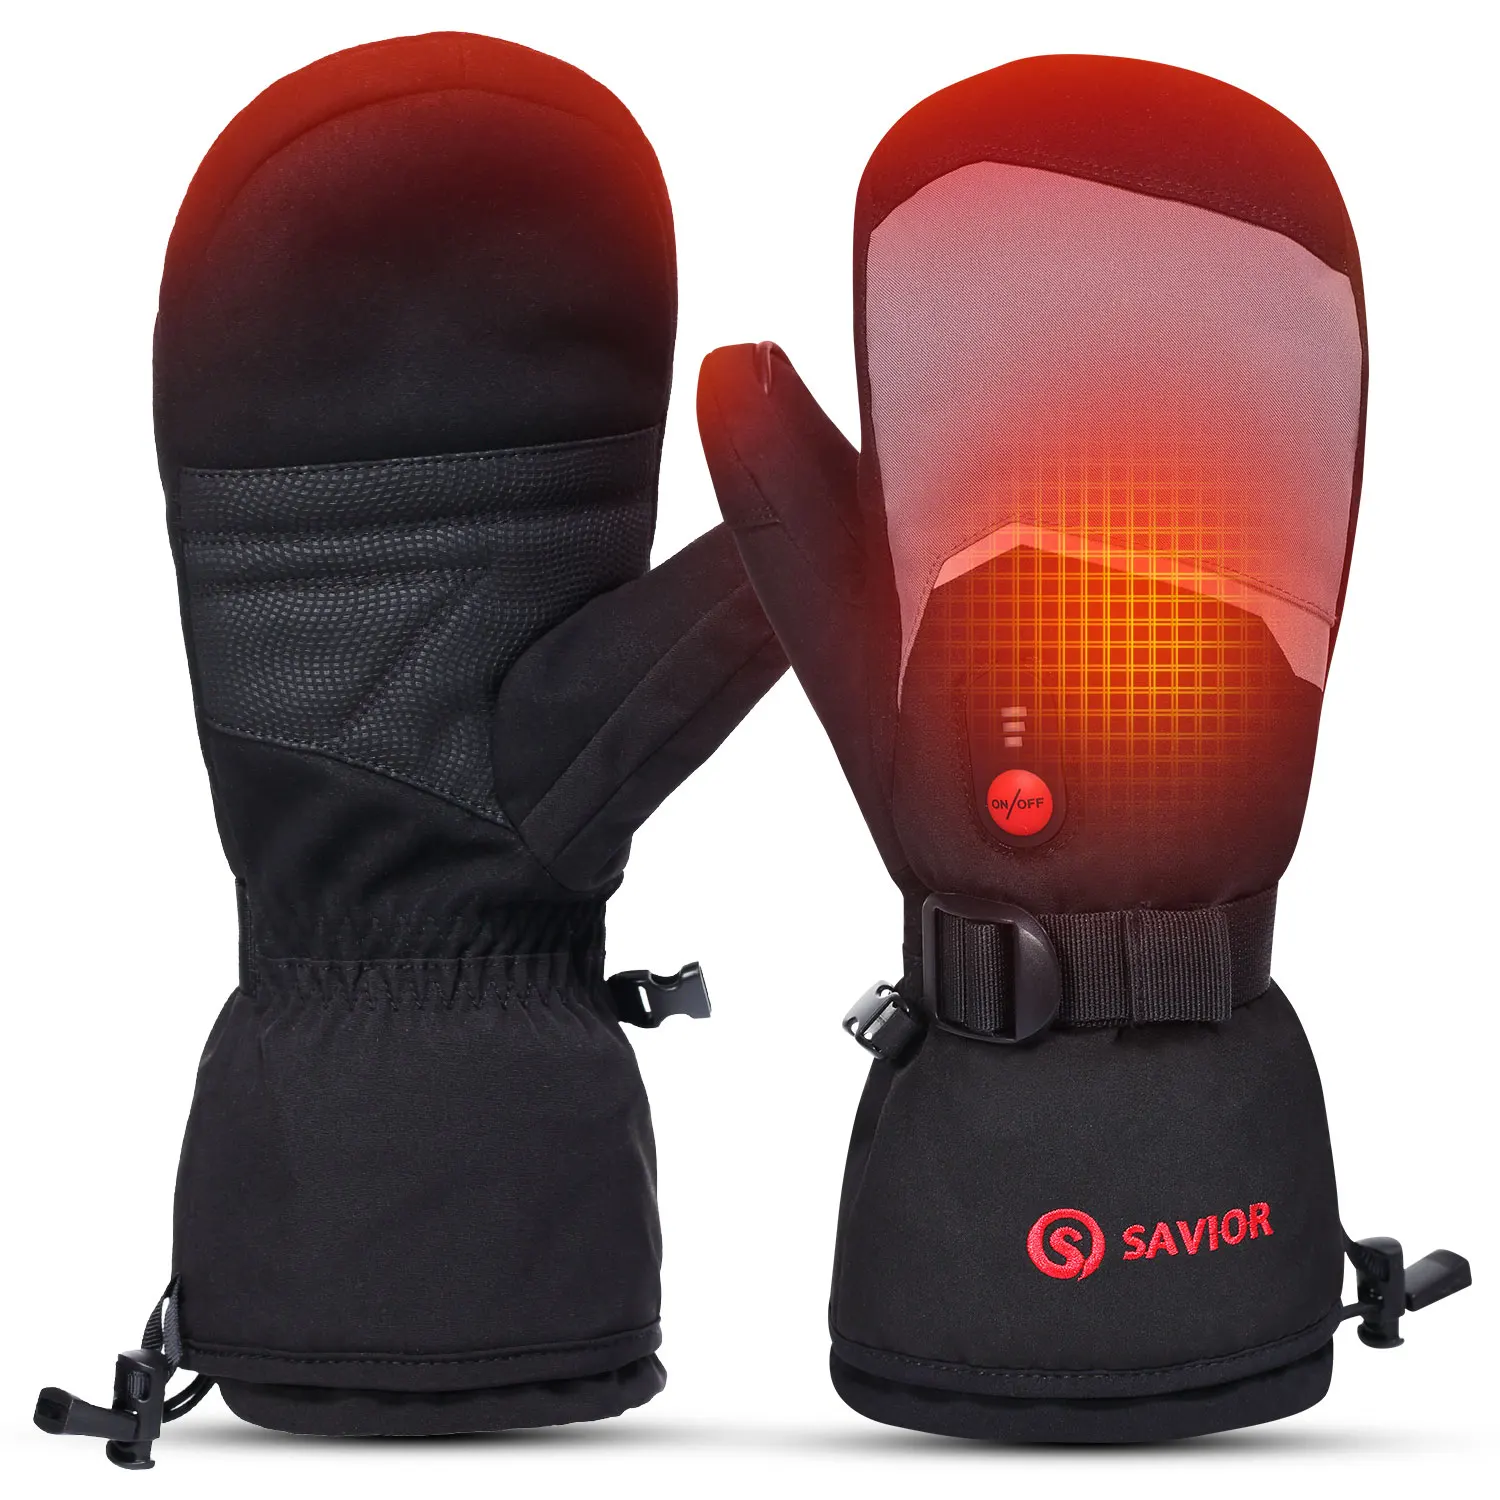 

Waterproof Men's Rechargeable Battery Powered Electric Heated Gloves Mittens Winter Warm Outdoor Sports such Skiing Snowboarding